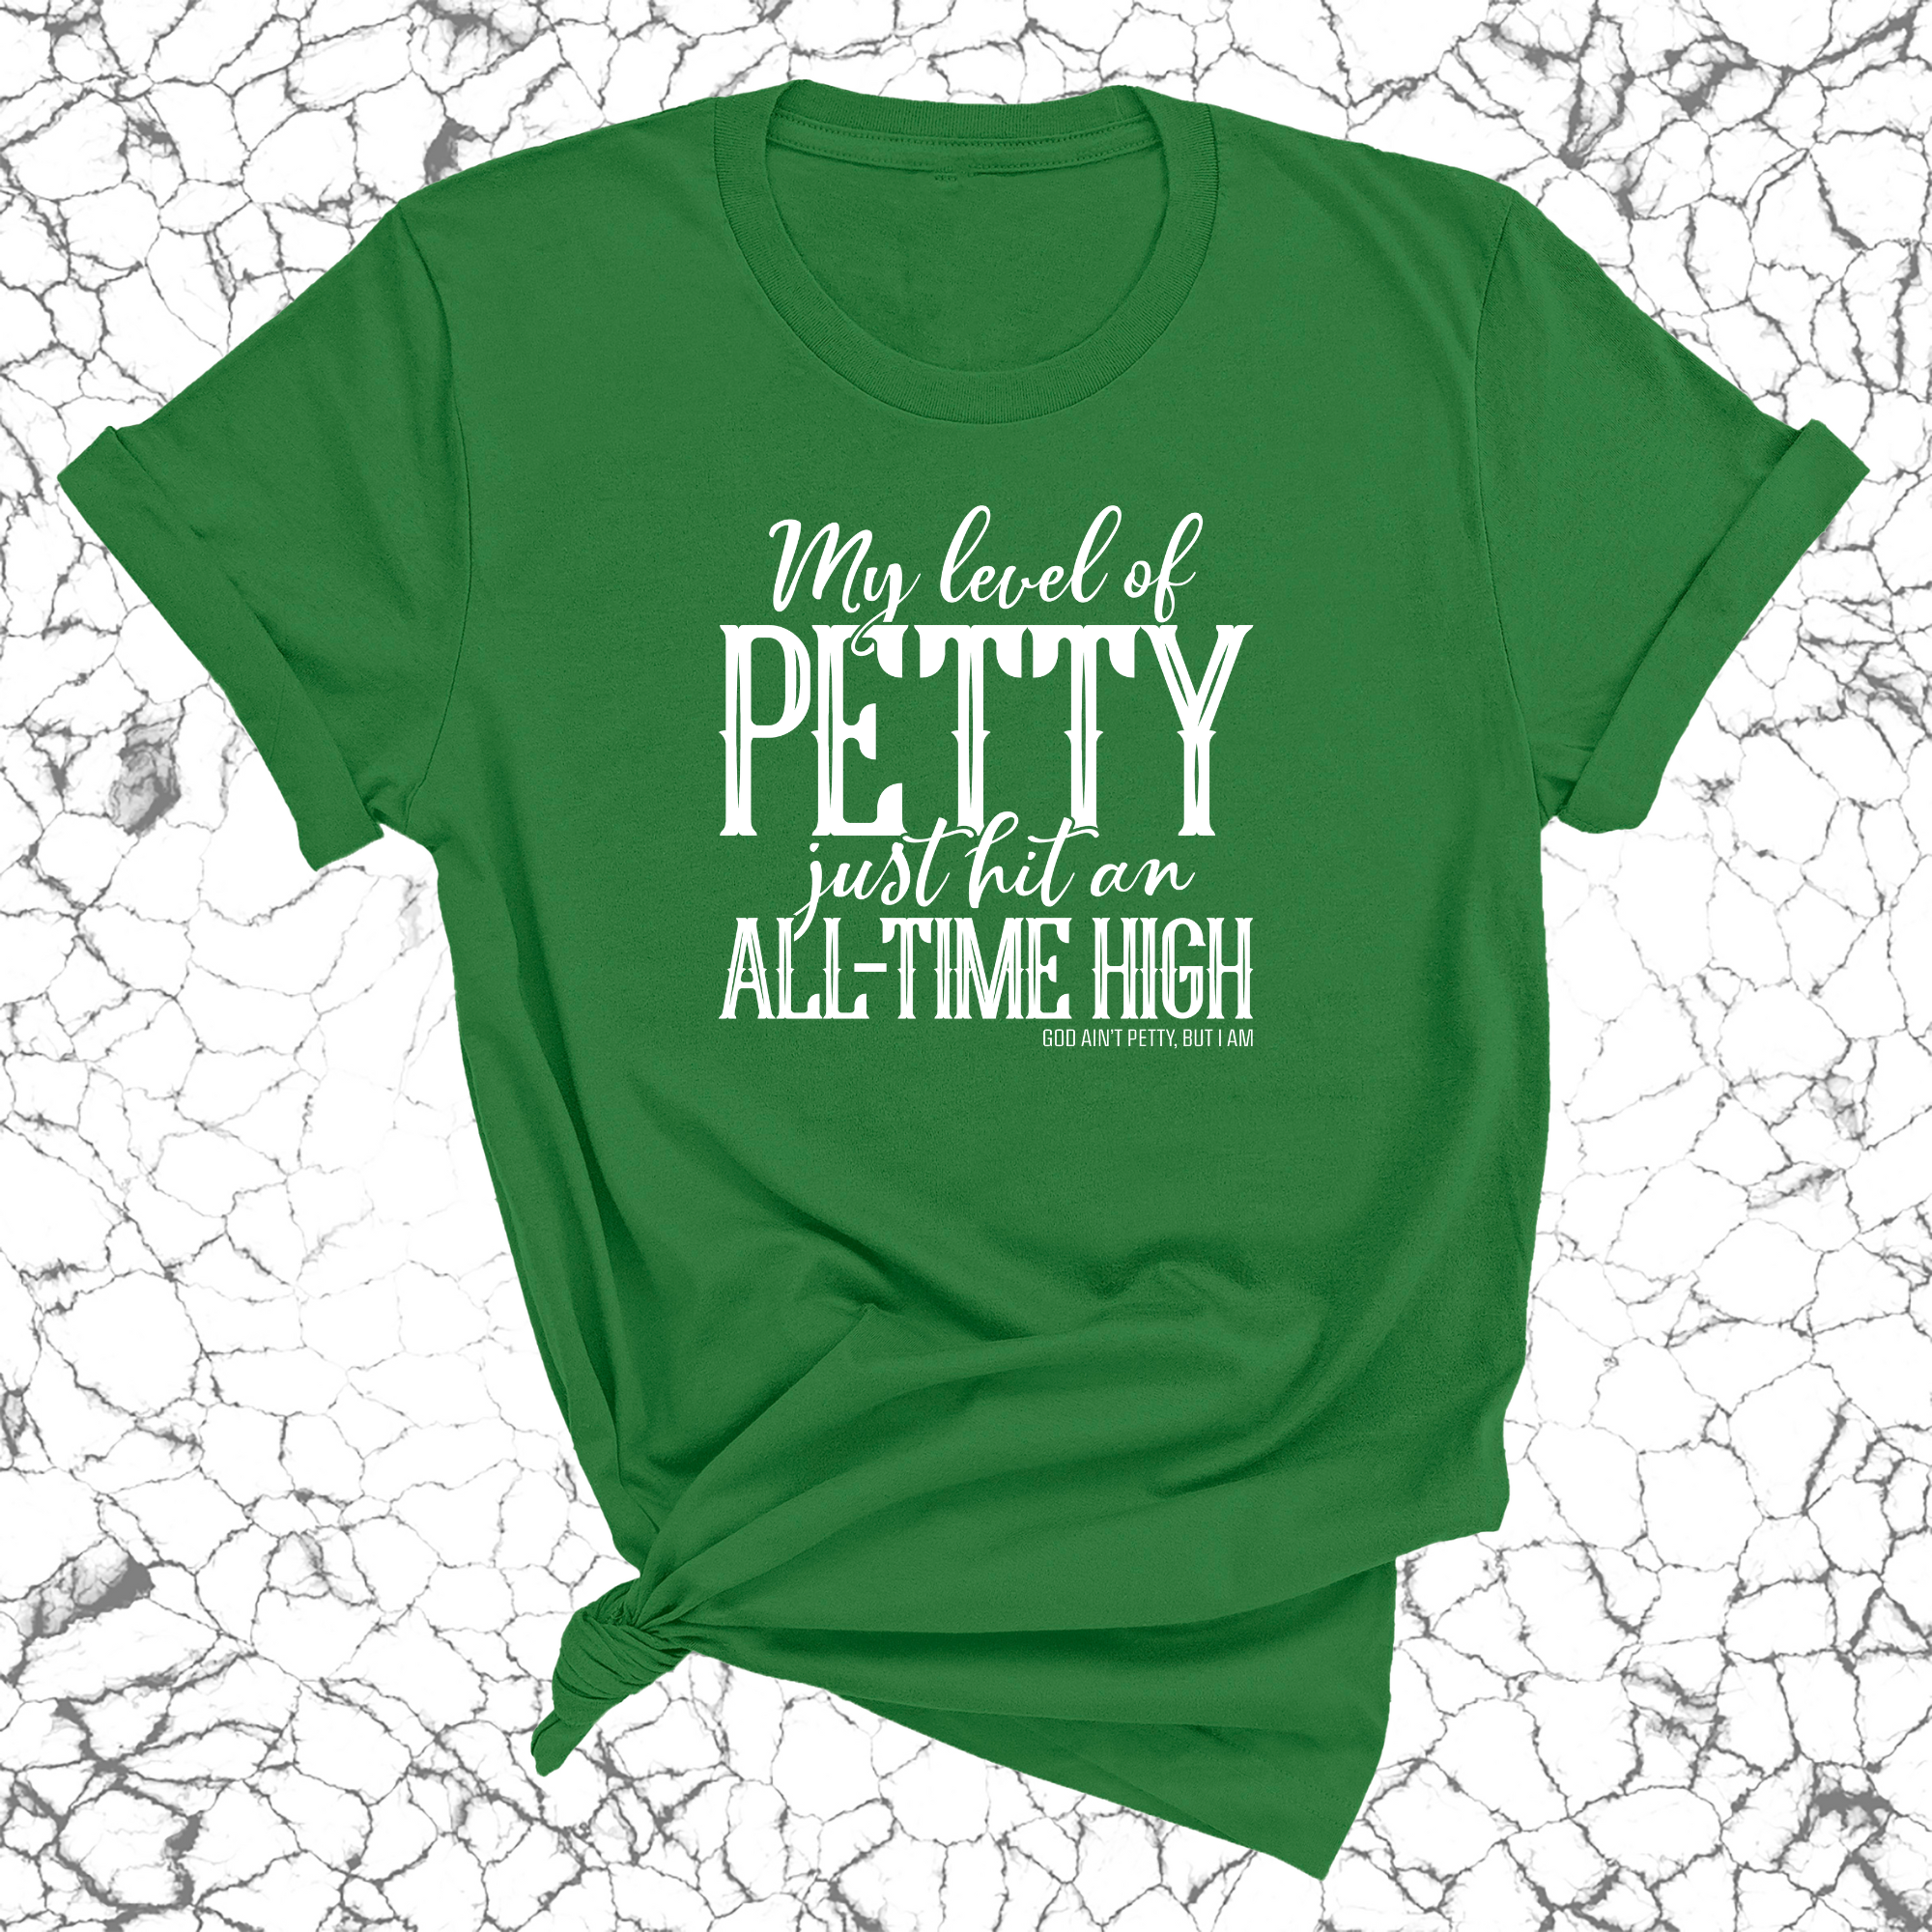 My level of petty just hit an ALL-TIME HIGH Unisex Tee-T-Shirt-The Original God Ain't Petty But I Am